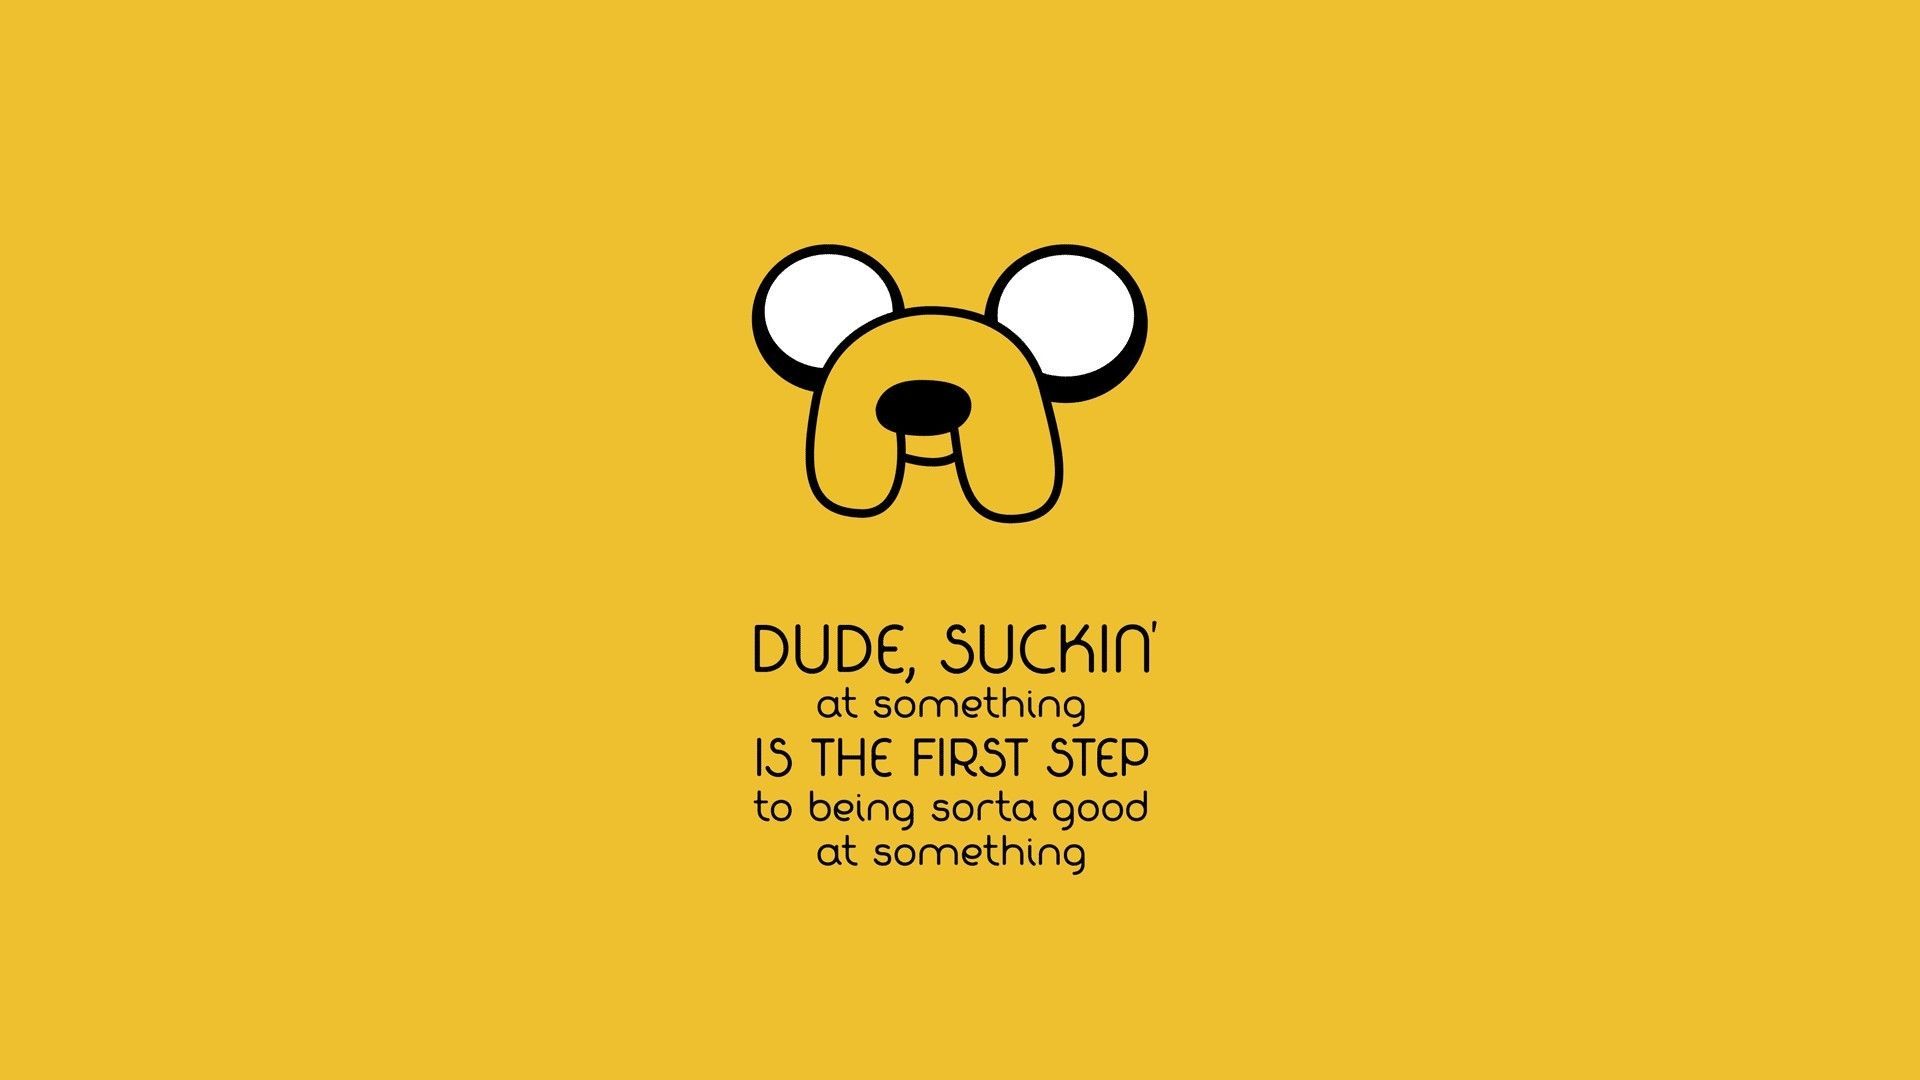 Adventure Time wallpaper with Jake the Dog and a quote. - Windows 95